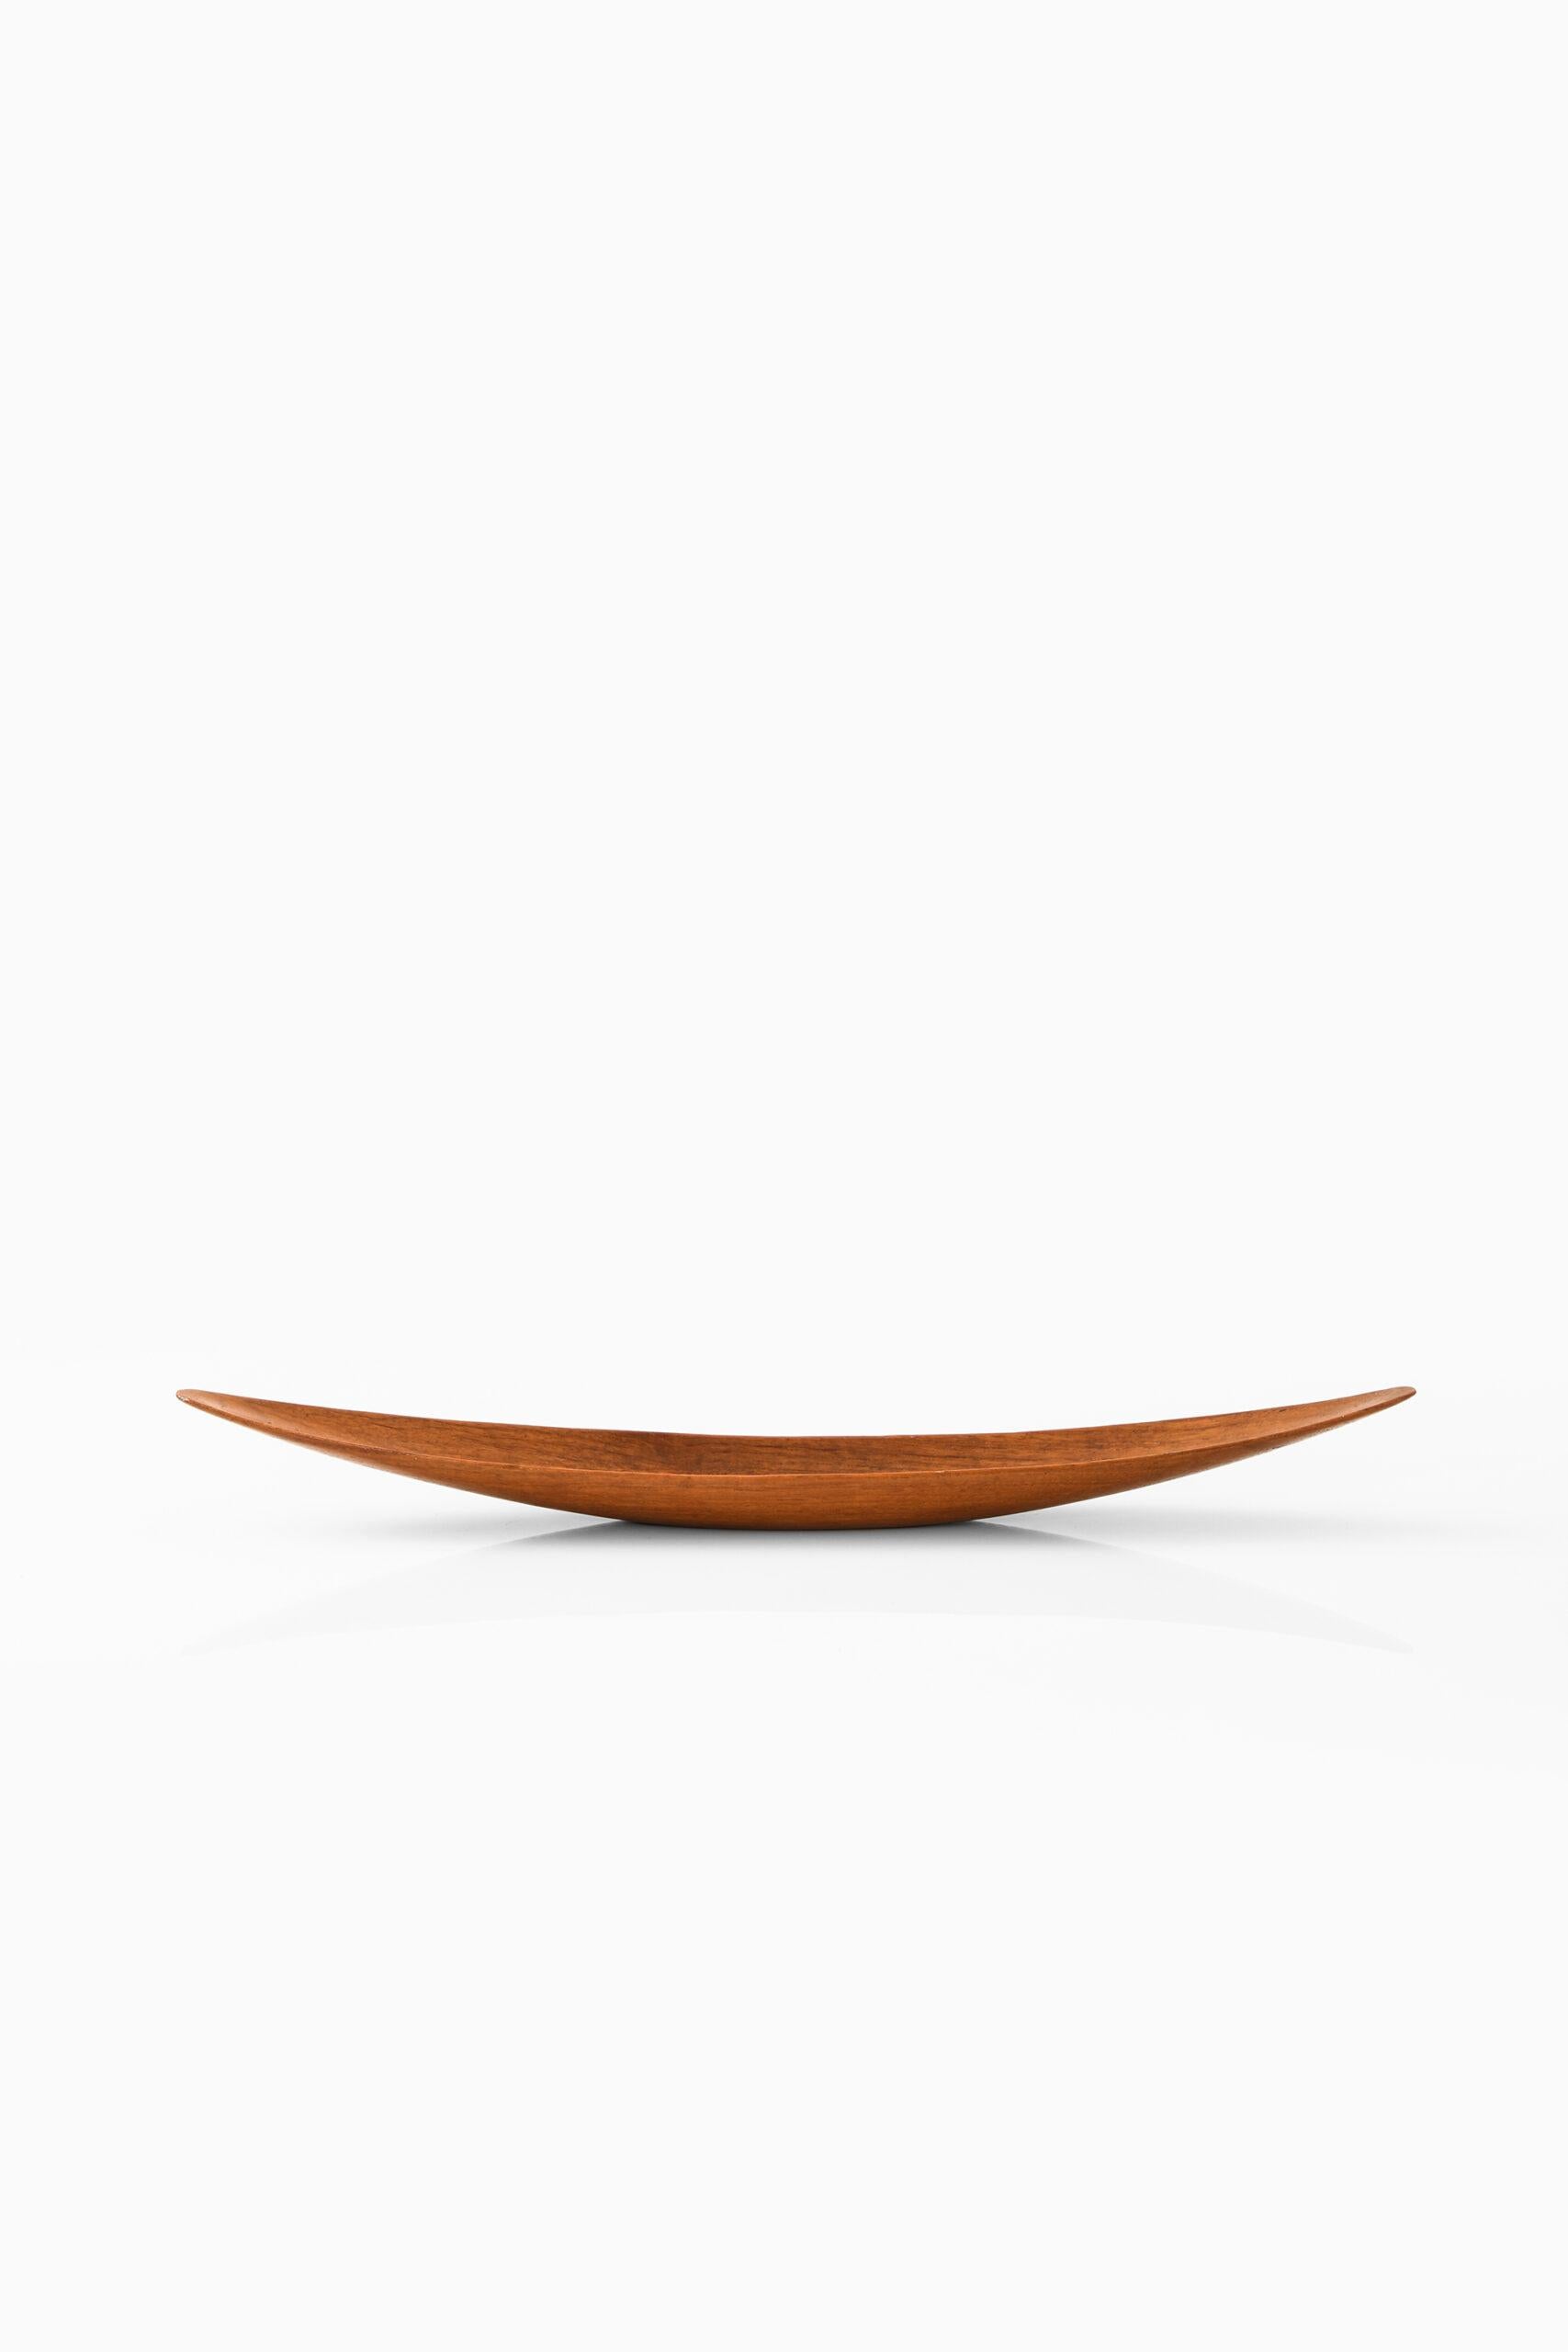 Large decorative bowl in teak by unknown designer. Produced in Sweden.